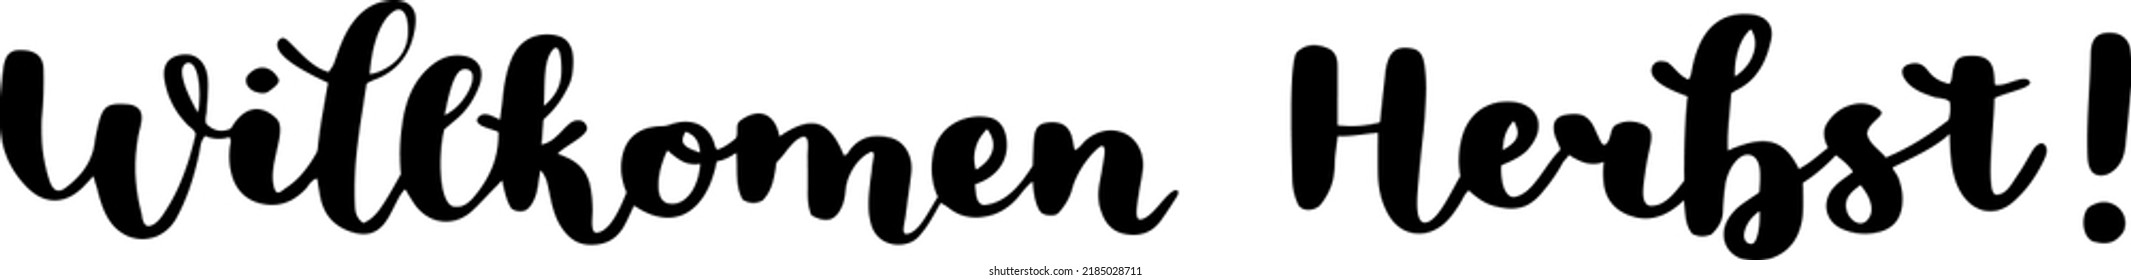 "Willkimen Herbst" hand drawn vector lettering in German, in English means "Welcome Autumn" or "Welcome Fall". German hand lettering. Vector modern calligraphy art